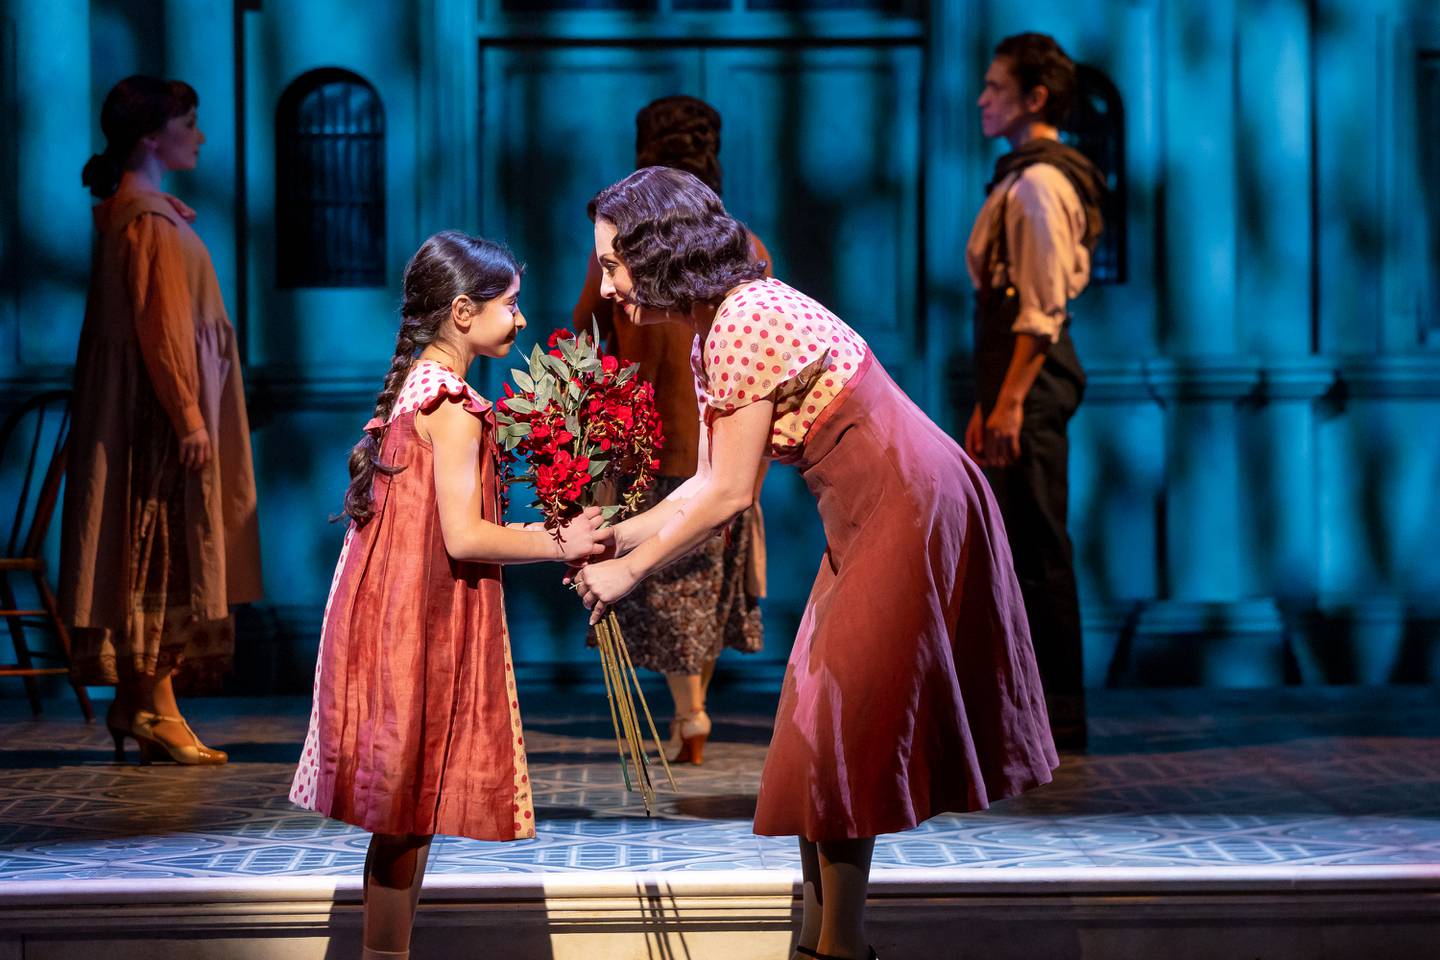 Nina Poulimas (Young Eva) and Michelle Aravena (Eva) star in the Tony Award-winning musical about the life of Eva Peron, "Evita," playing at Drury Lane Theatre in Oakbrook Terrace through March 20.